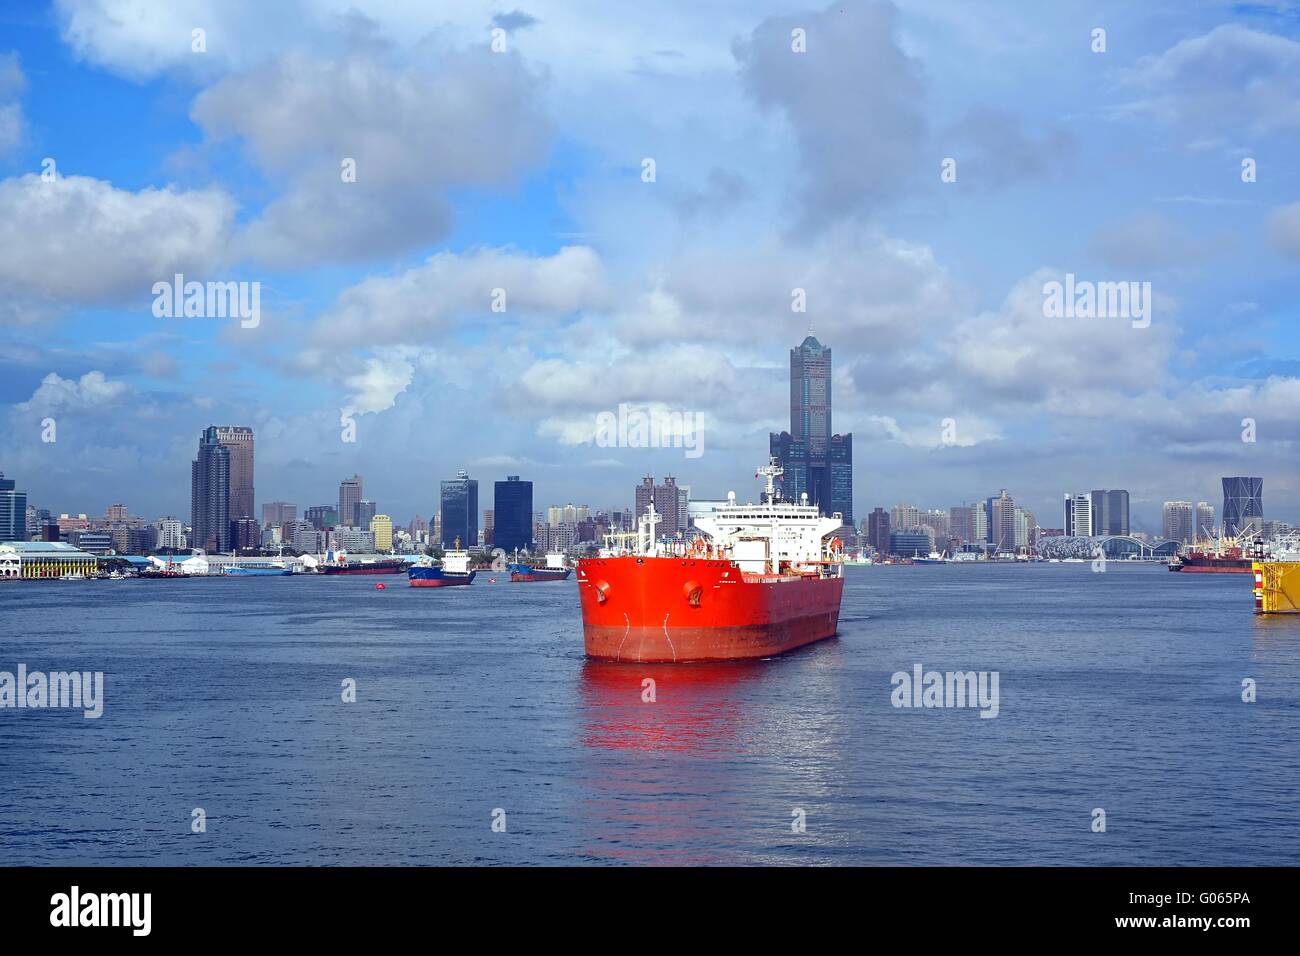 A large red oil tanker leaves Kaohsiung Port, in the background the skyline of the city. Stock Photo